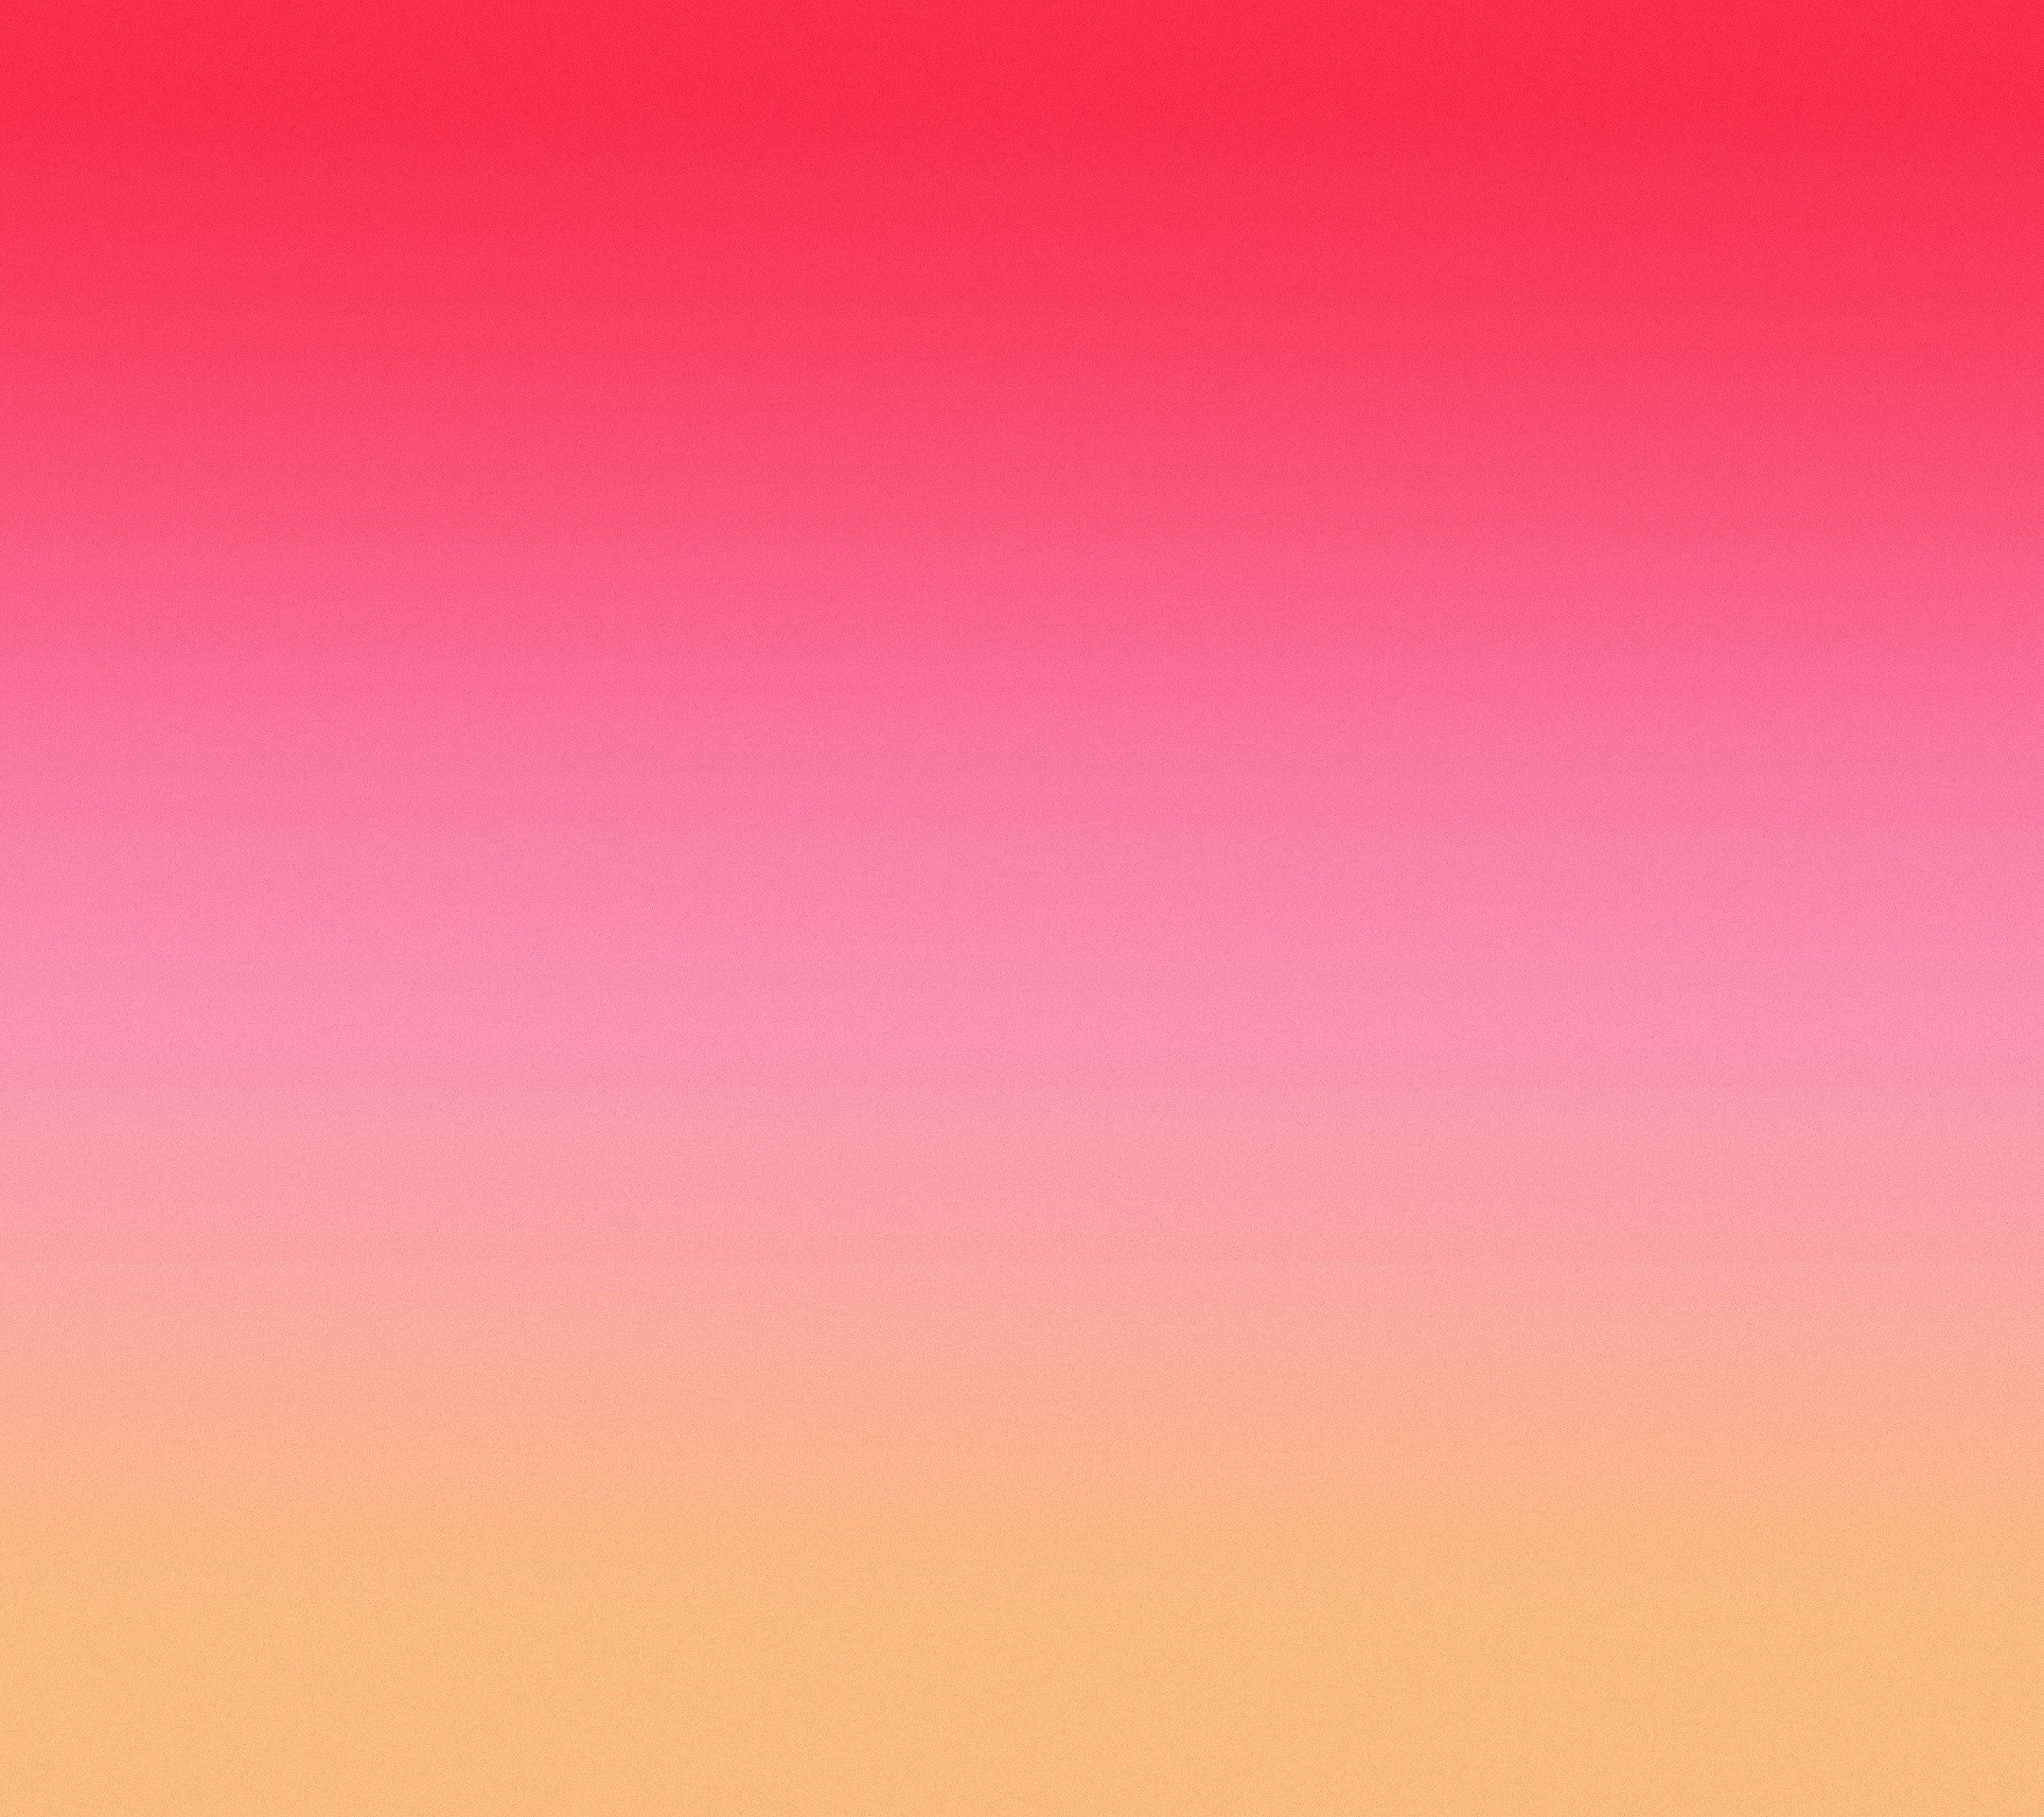 Pink-Red Gradient by Halaxega on DeviantArt